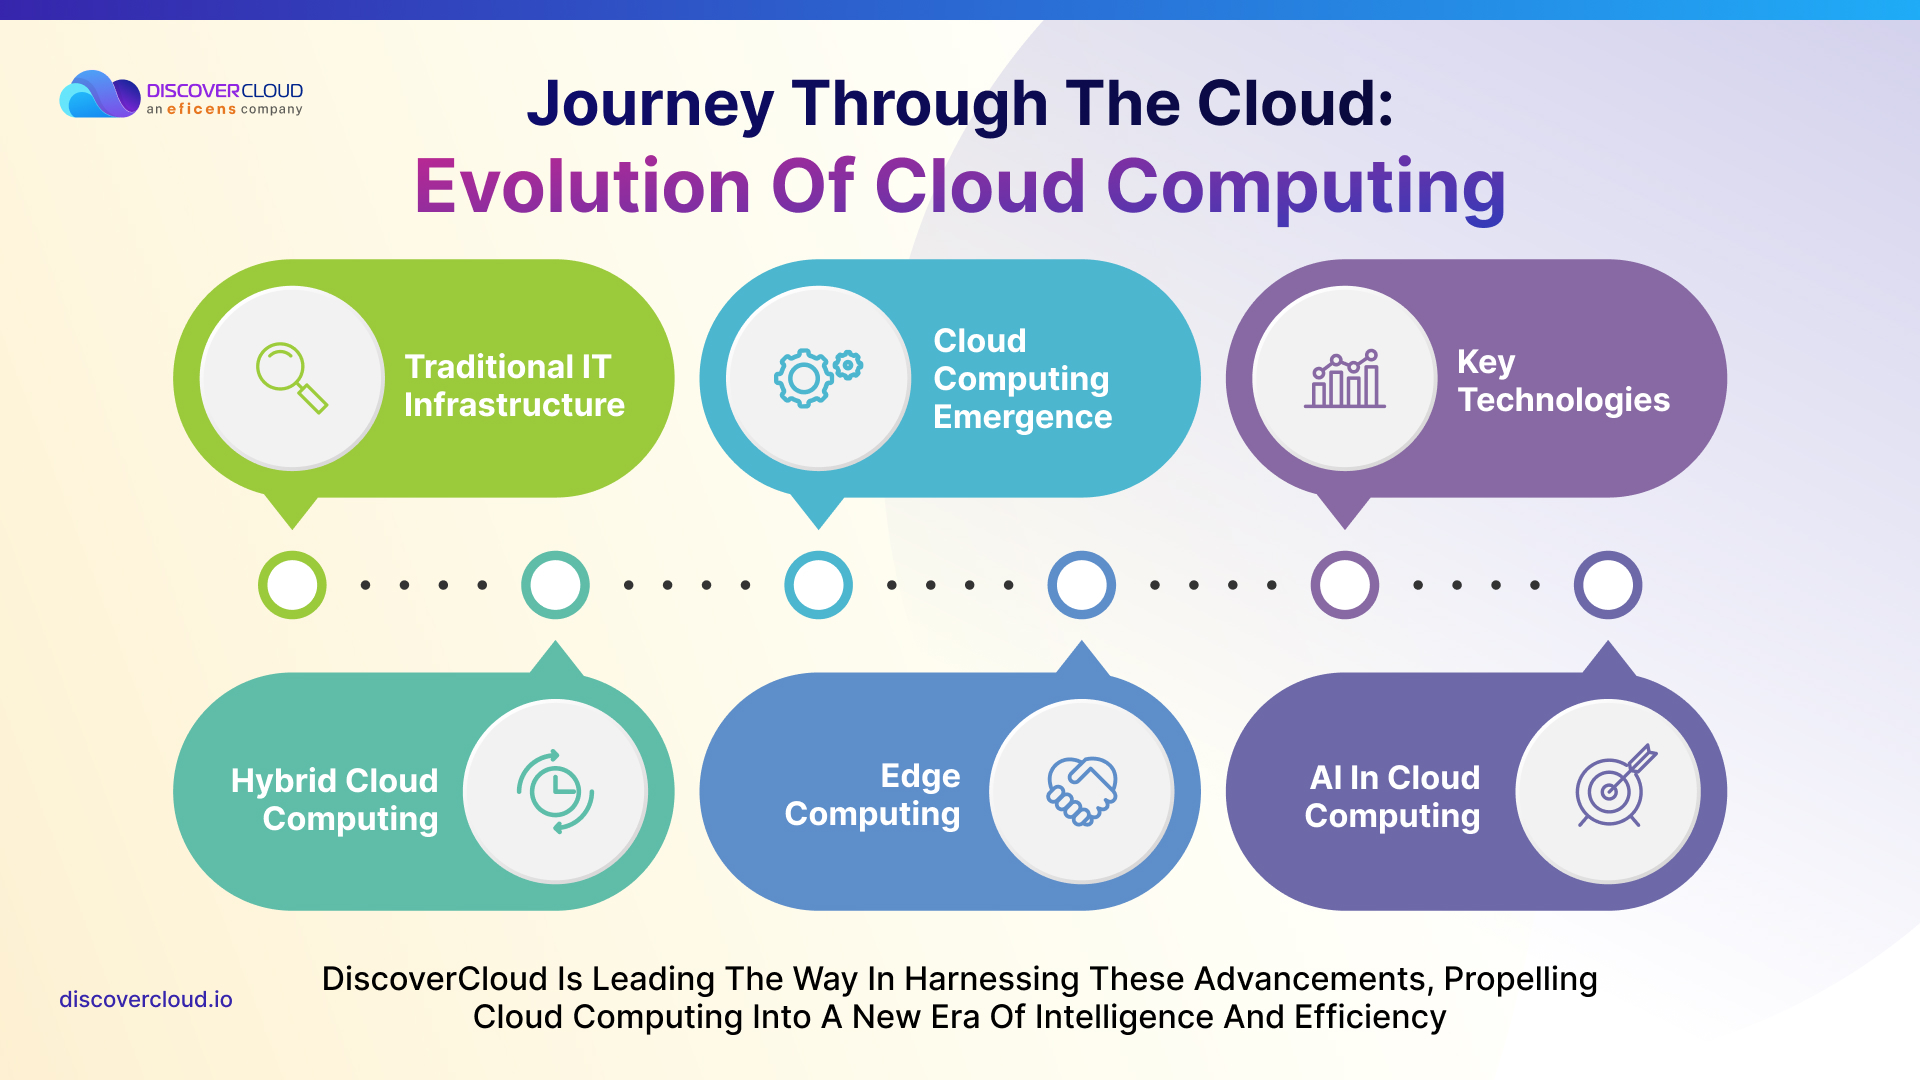 Journey Through the Cloud: Evolution of Cloud Computing